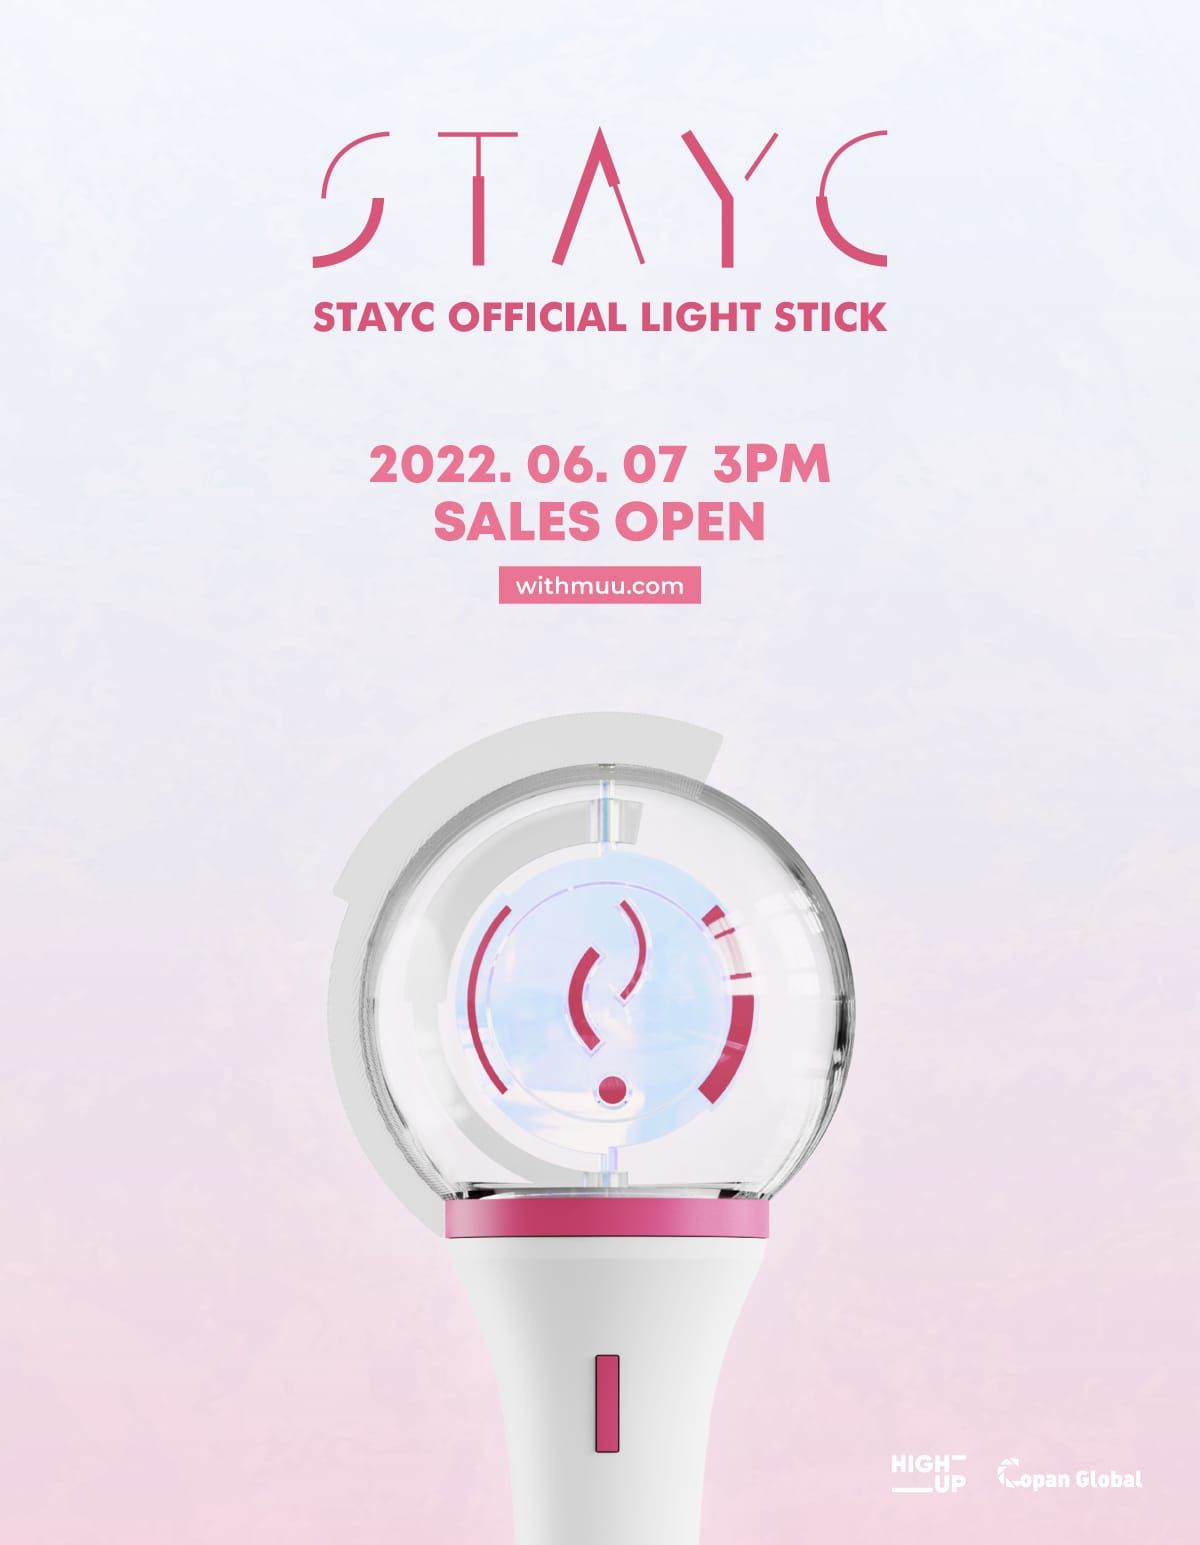 Light stick official STAYC.